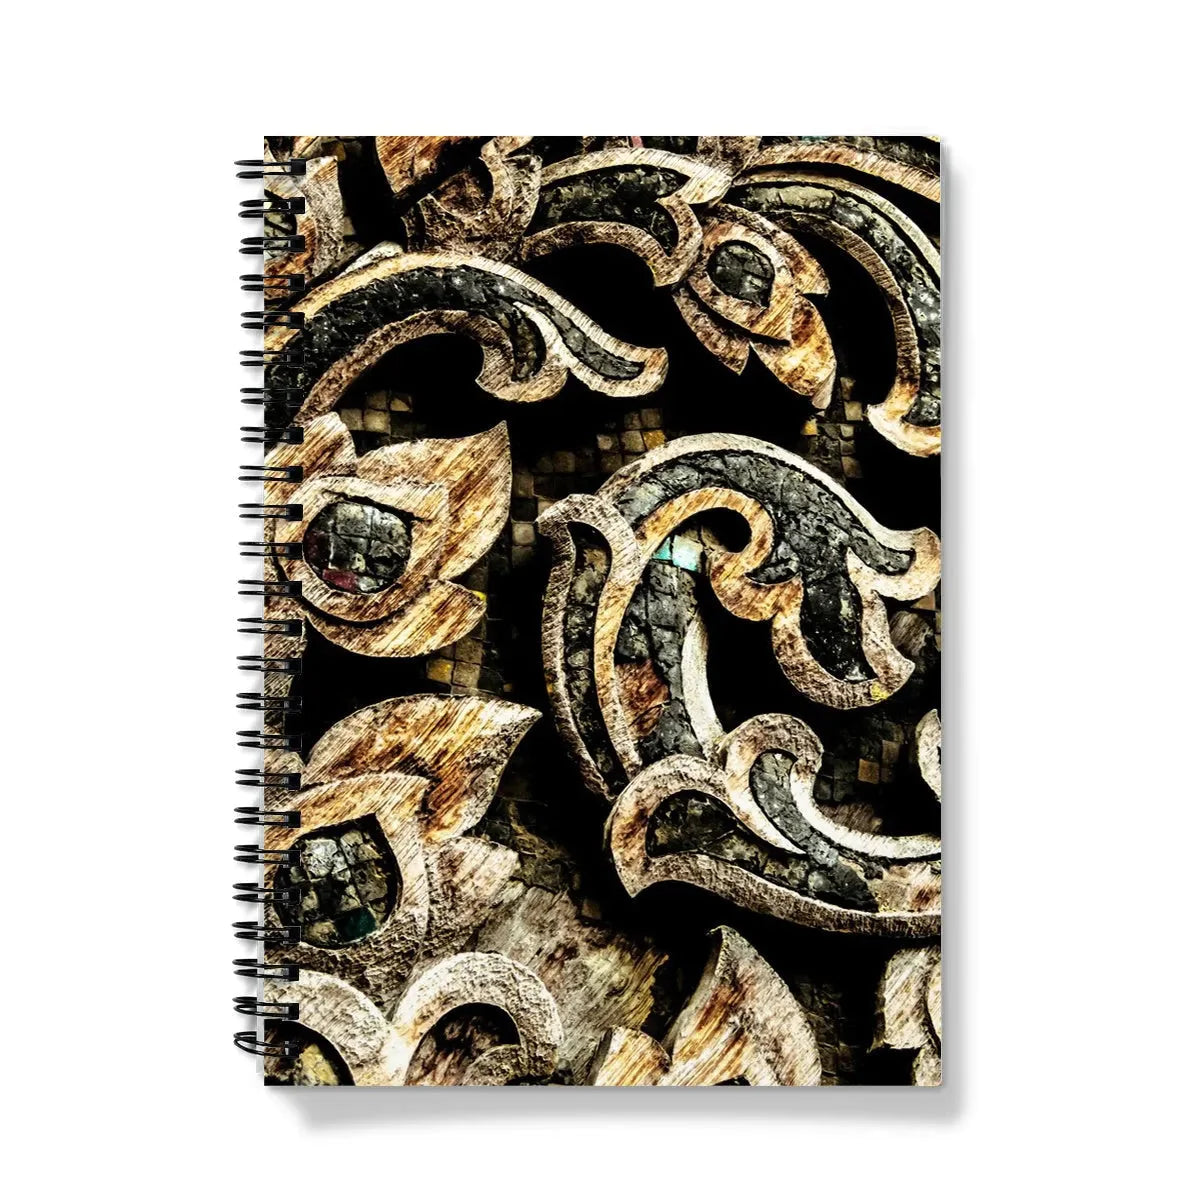 Against The Grain Notebook - A5 - Graph Paper - Notebooks & Notepads - Aesthetic Art